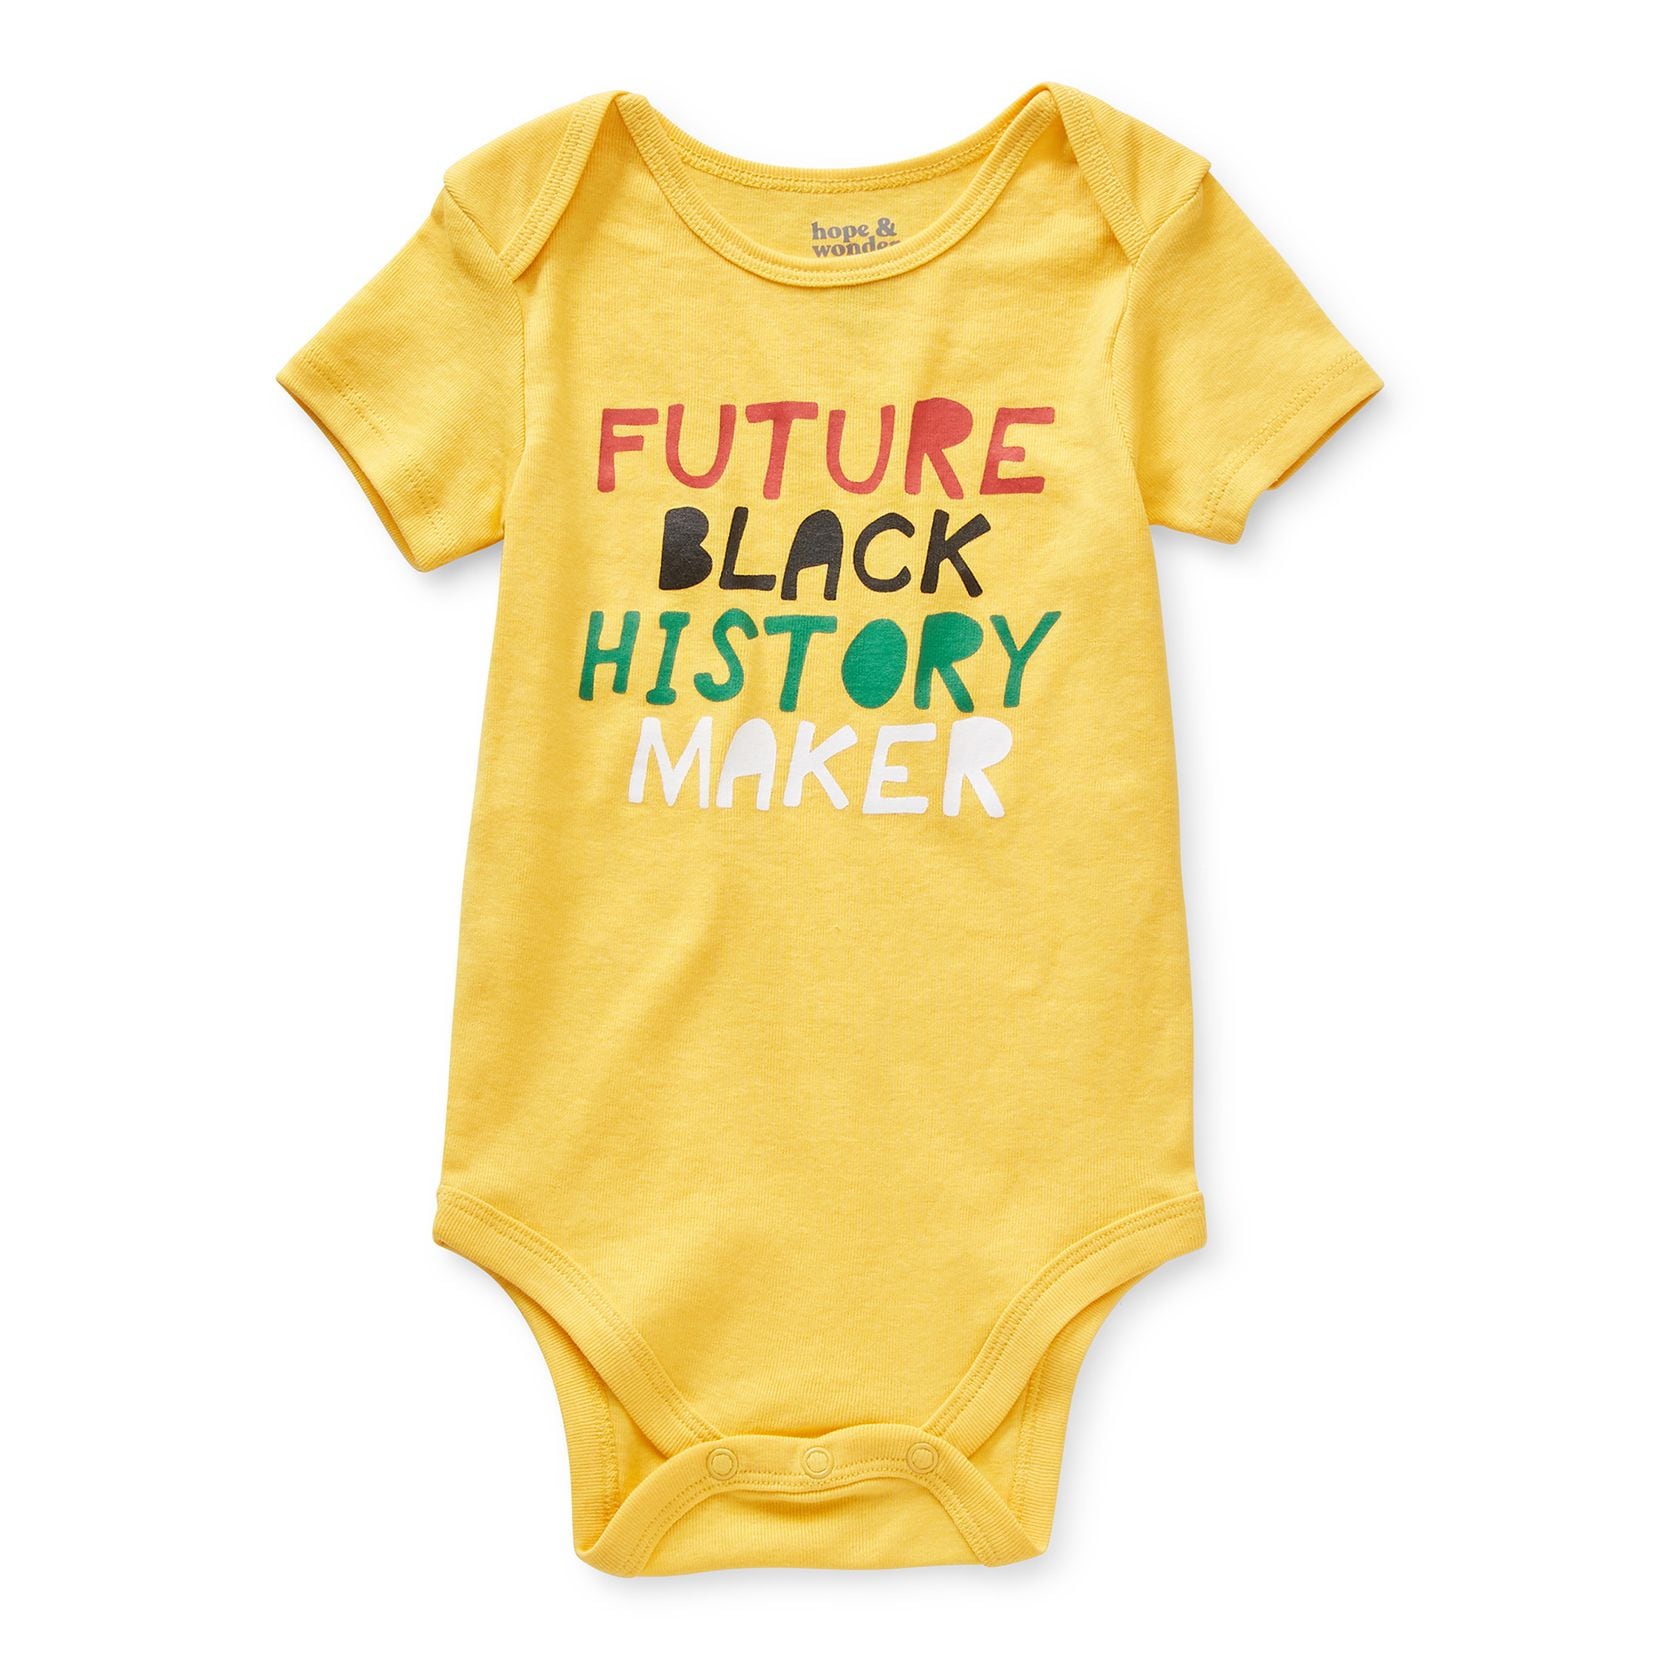 A baby onesie from J.C. Penney's new Hope & Wonder brand. 